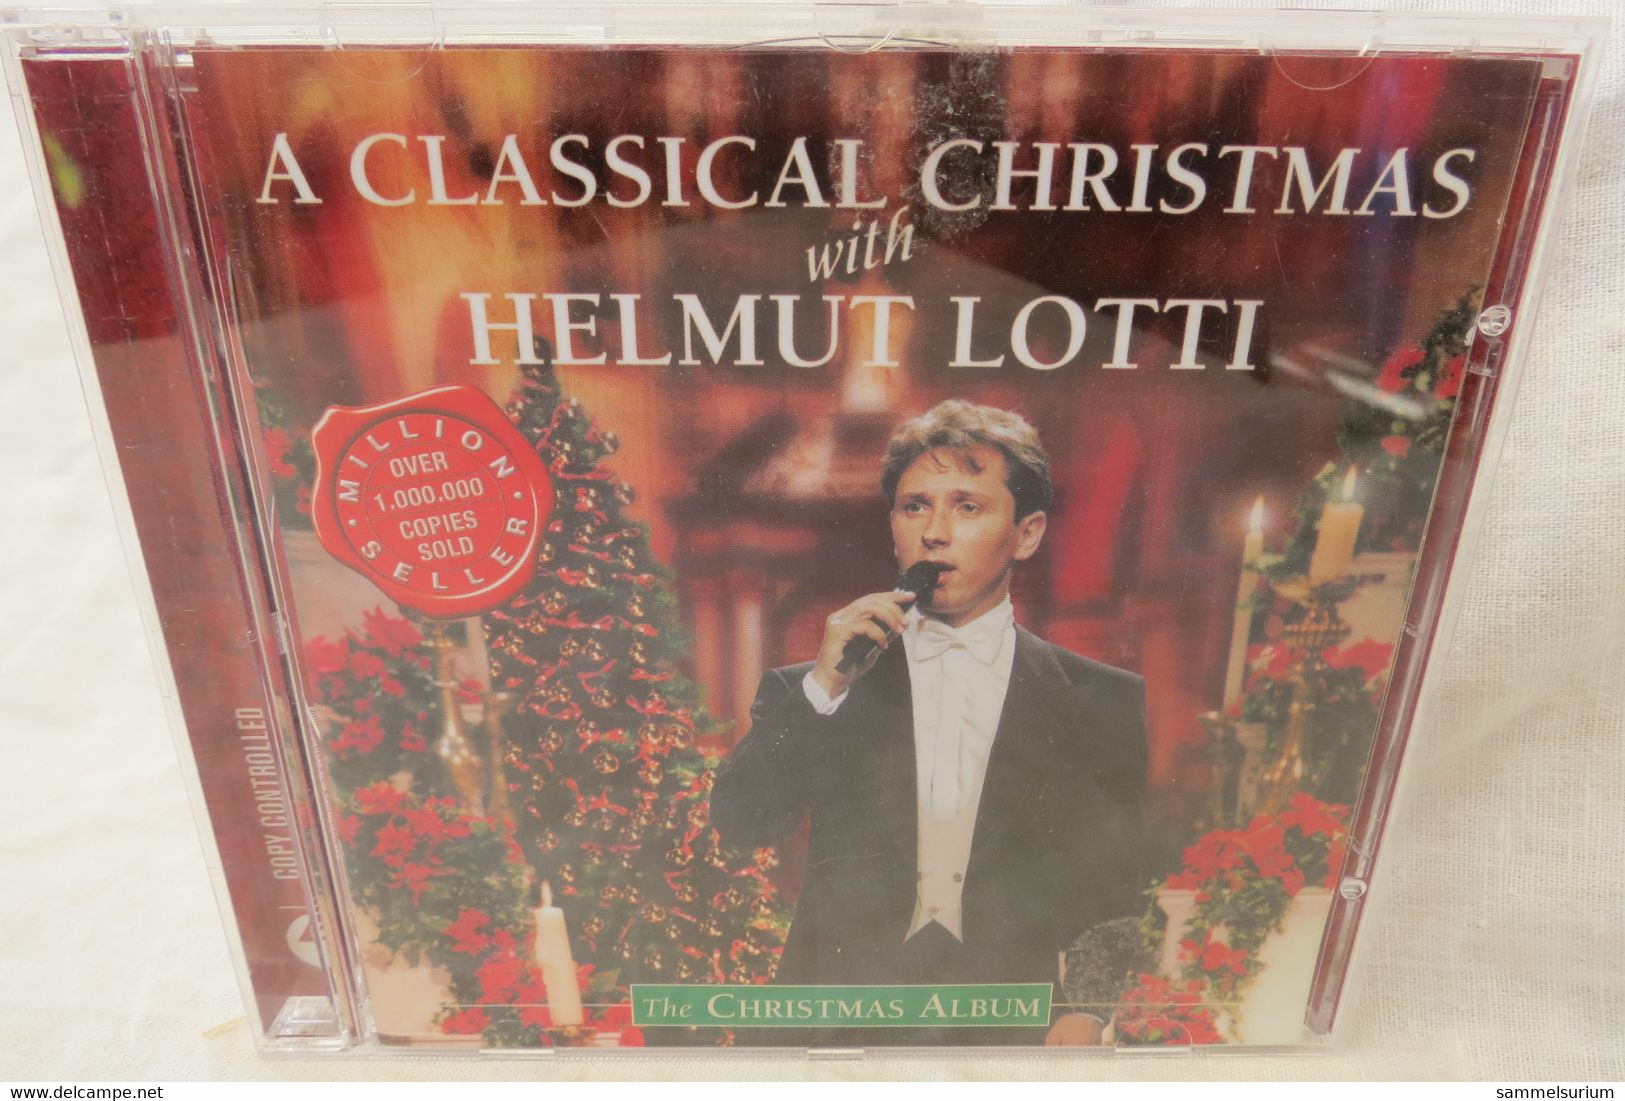 CD Helmut Lotti "A Classical Christmas With Helmut Lotti" The Christmas Album - Weihnachtslieder